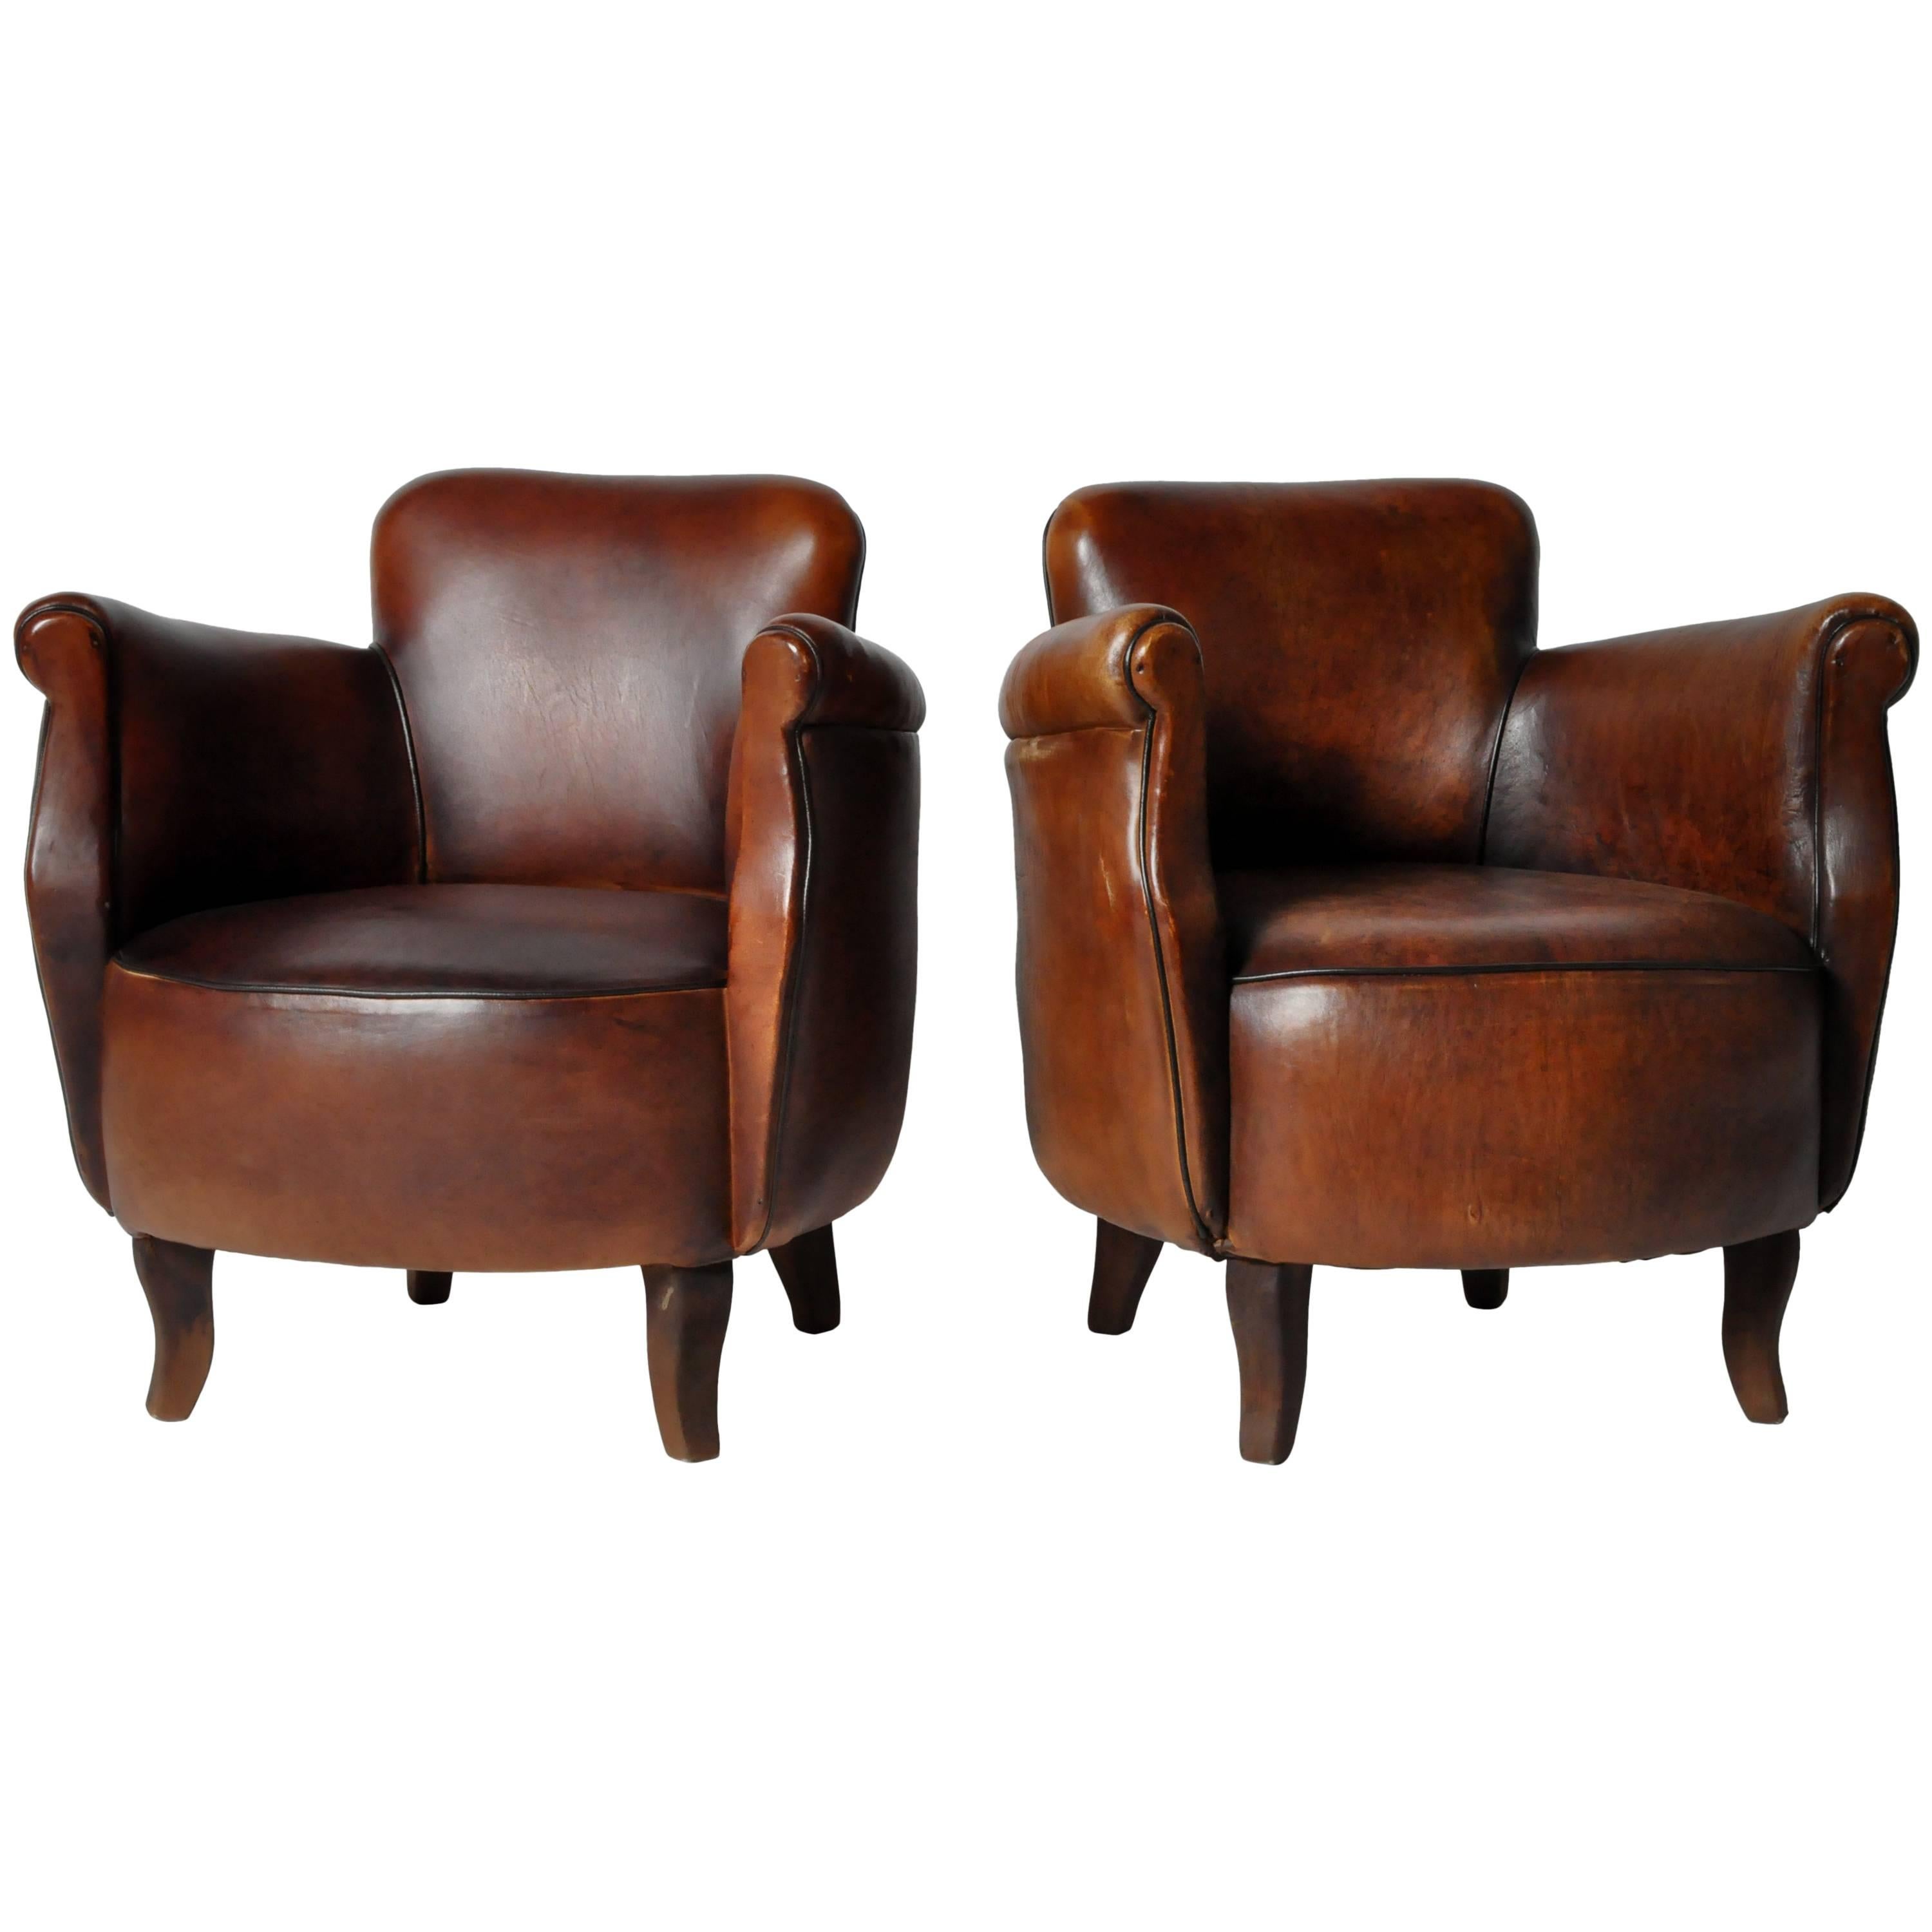 Pair of Petite Brown Leather Club Chairs